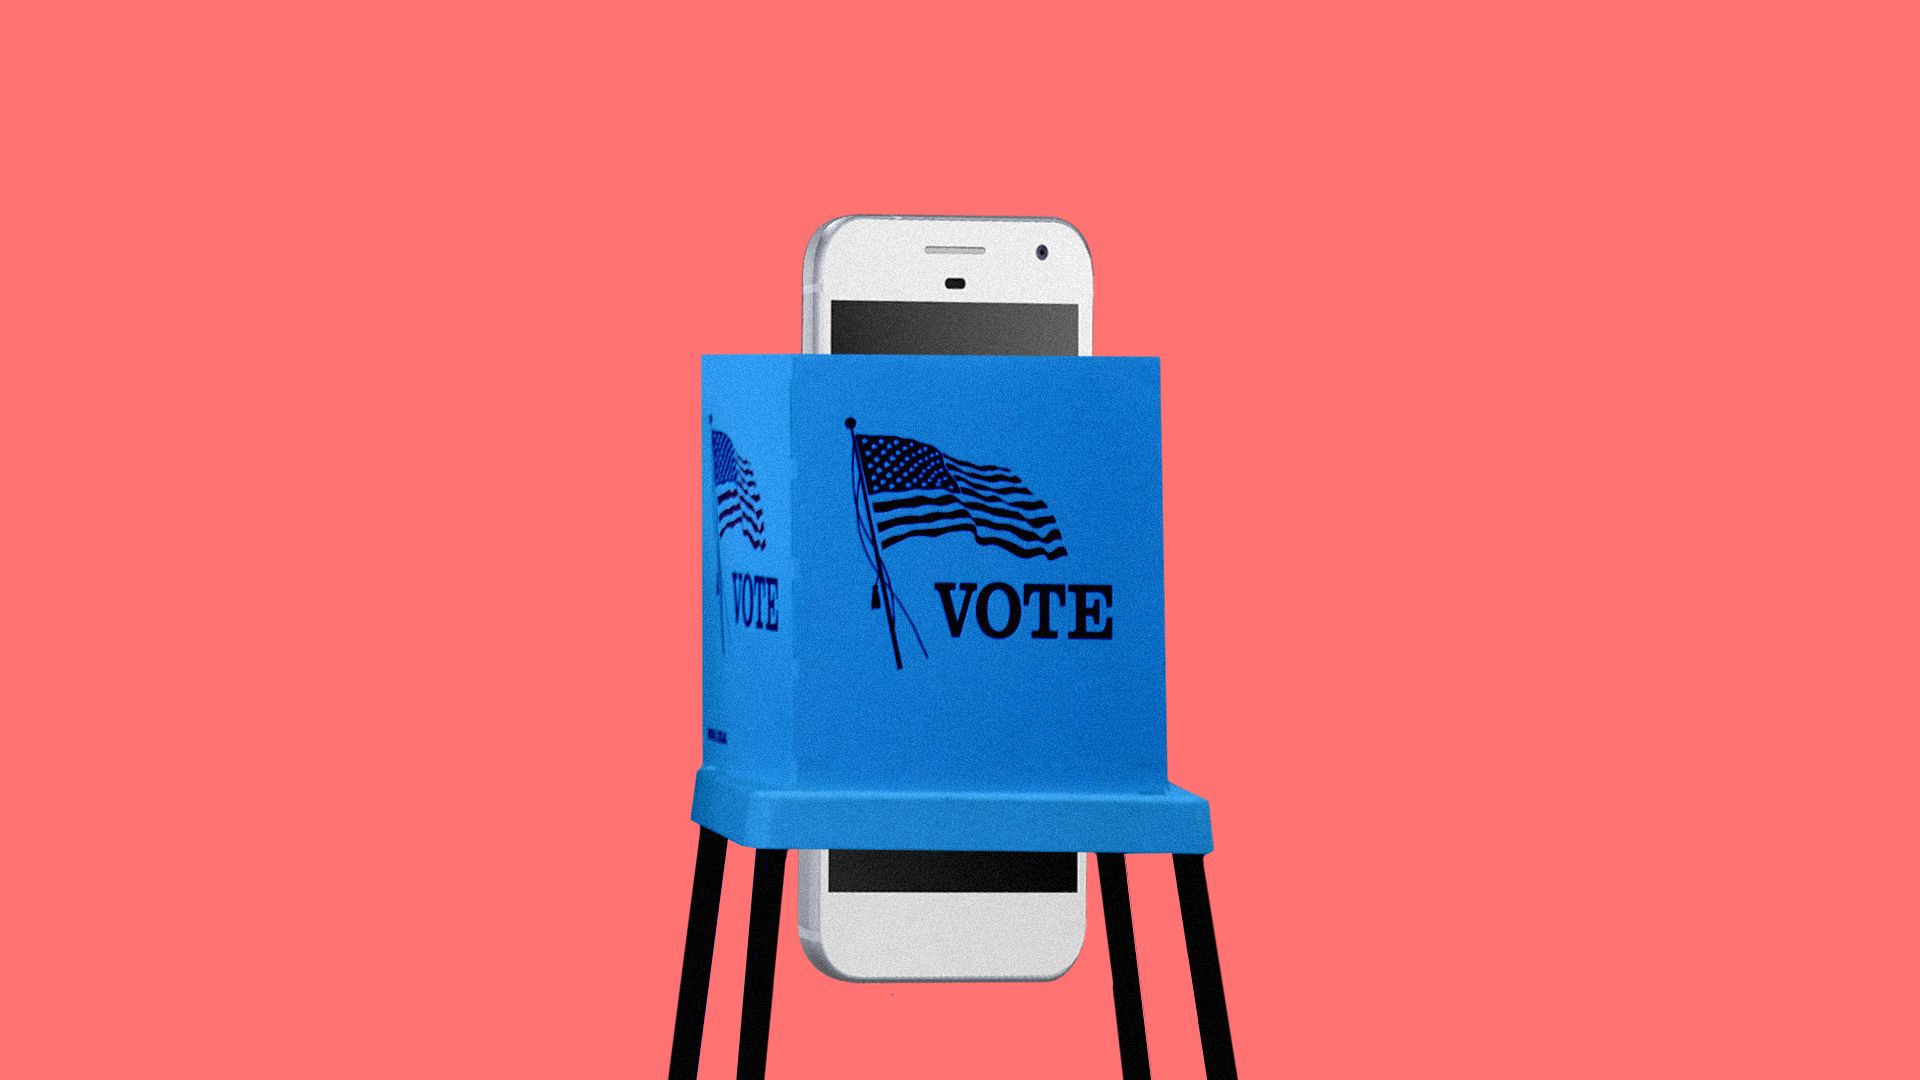 Illustration of phone in a voting booth